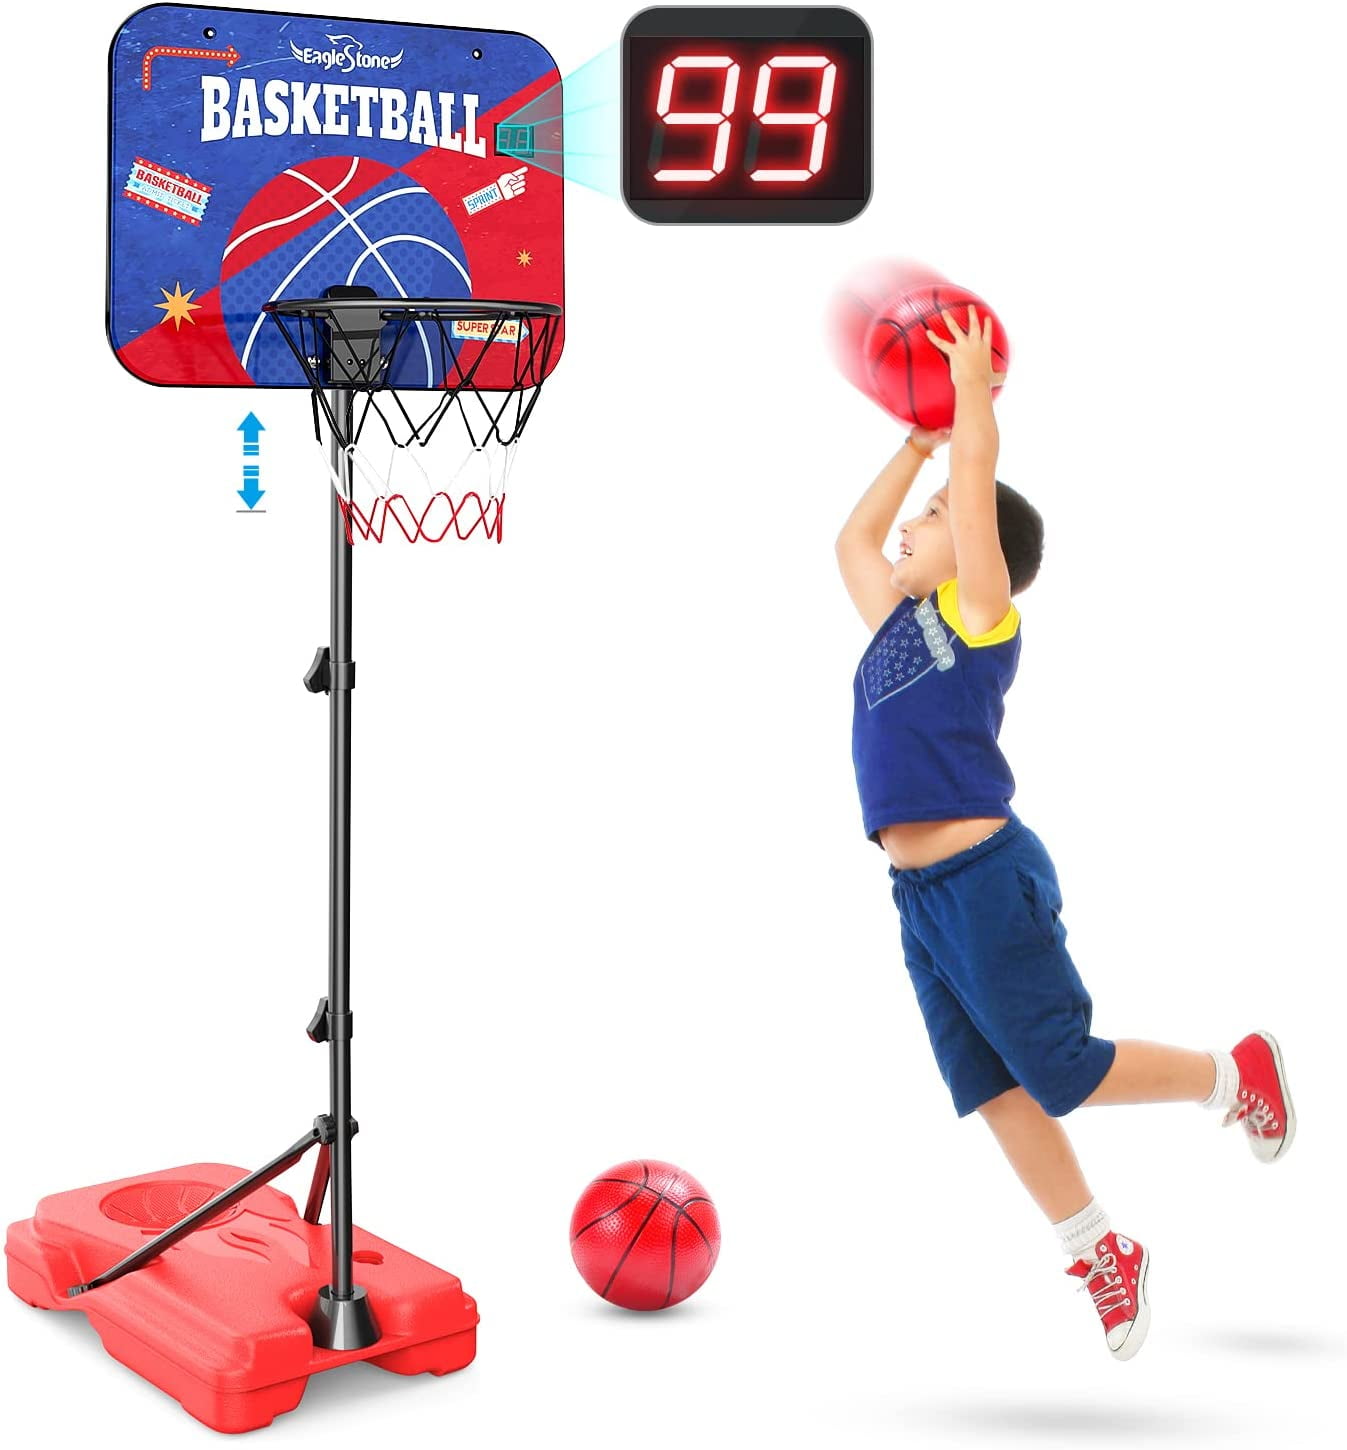 Double Shot Basketball Game SEGMART Kids Arcade Basketball Hoop Indoor with 6 Basketballs and Air Pump Basketball Goal Gifts for Children Boys Girls Training System Indoor/Outdoor Sports Toys 